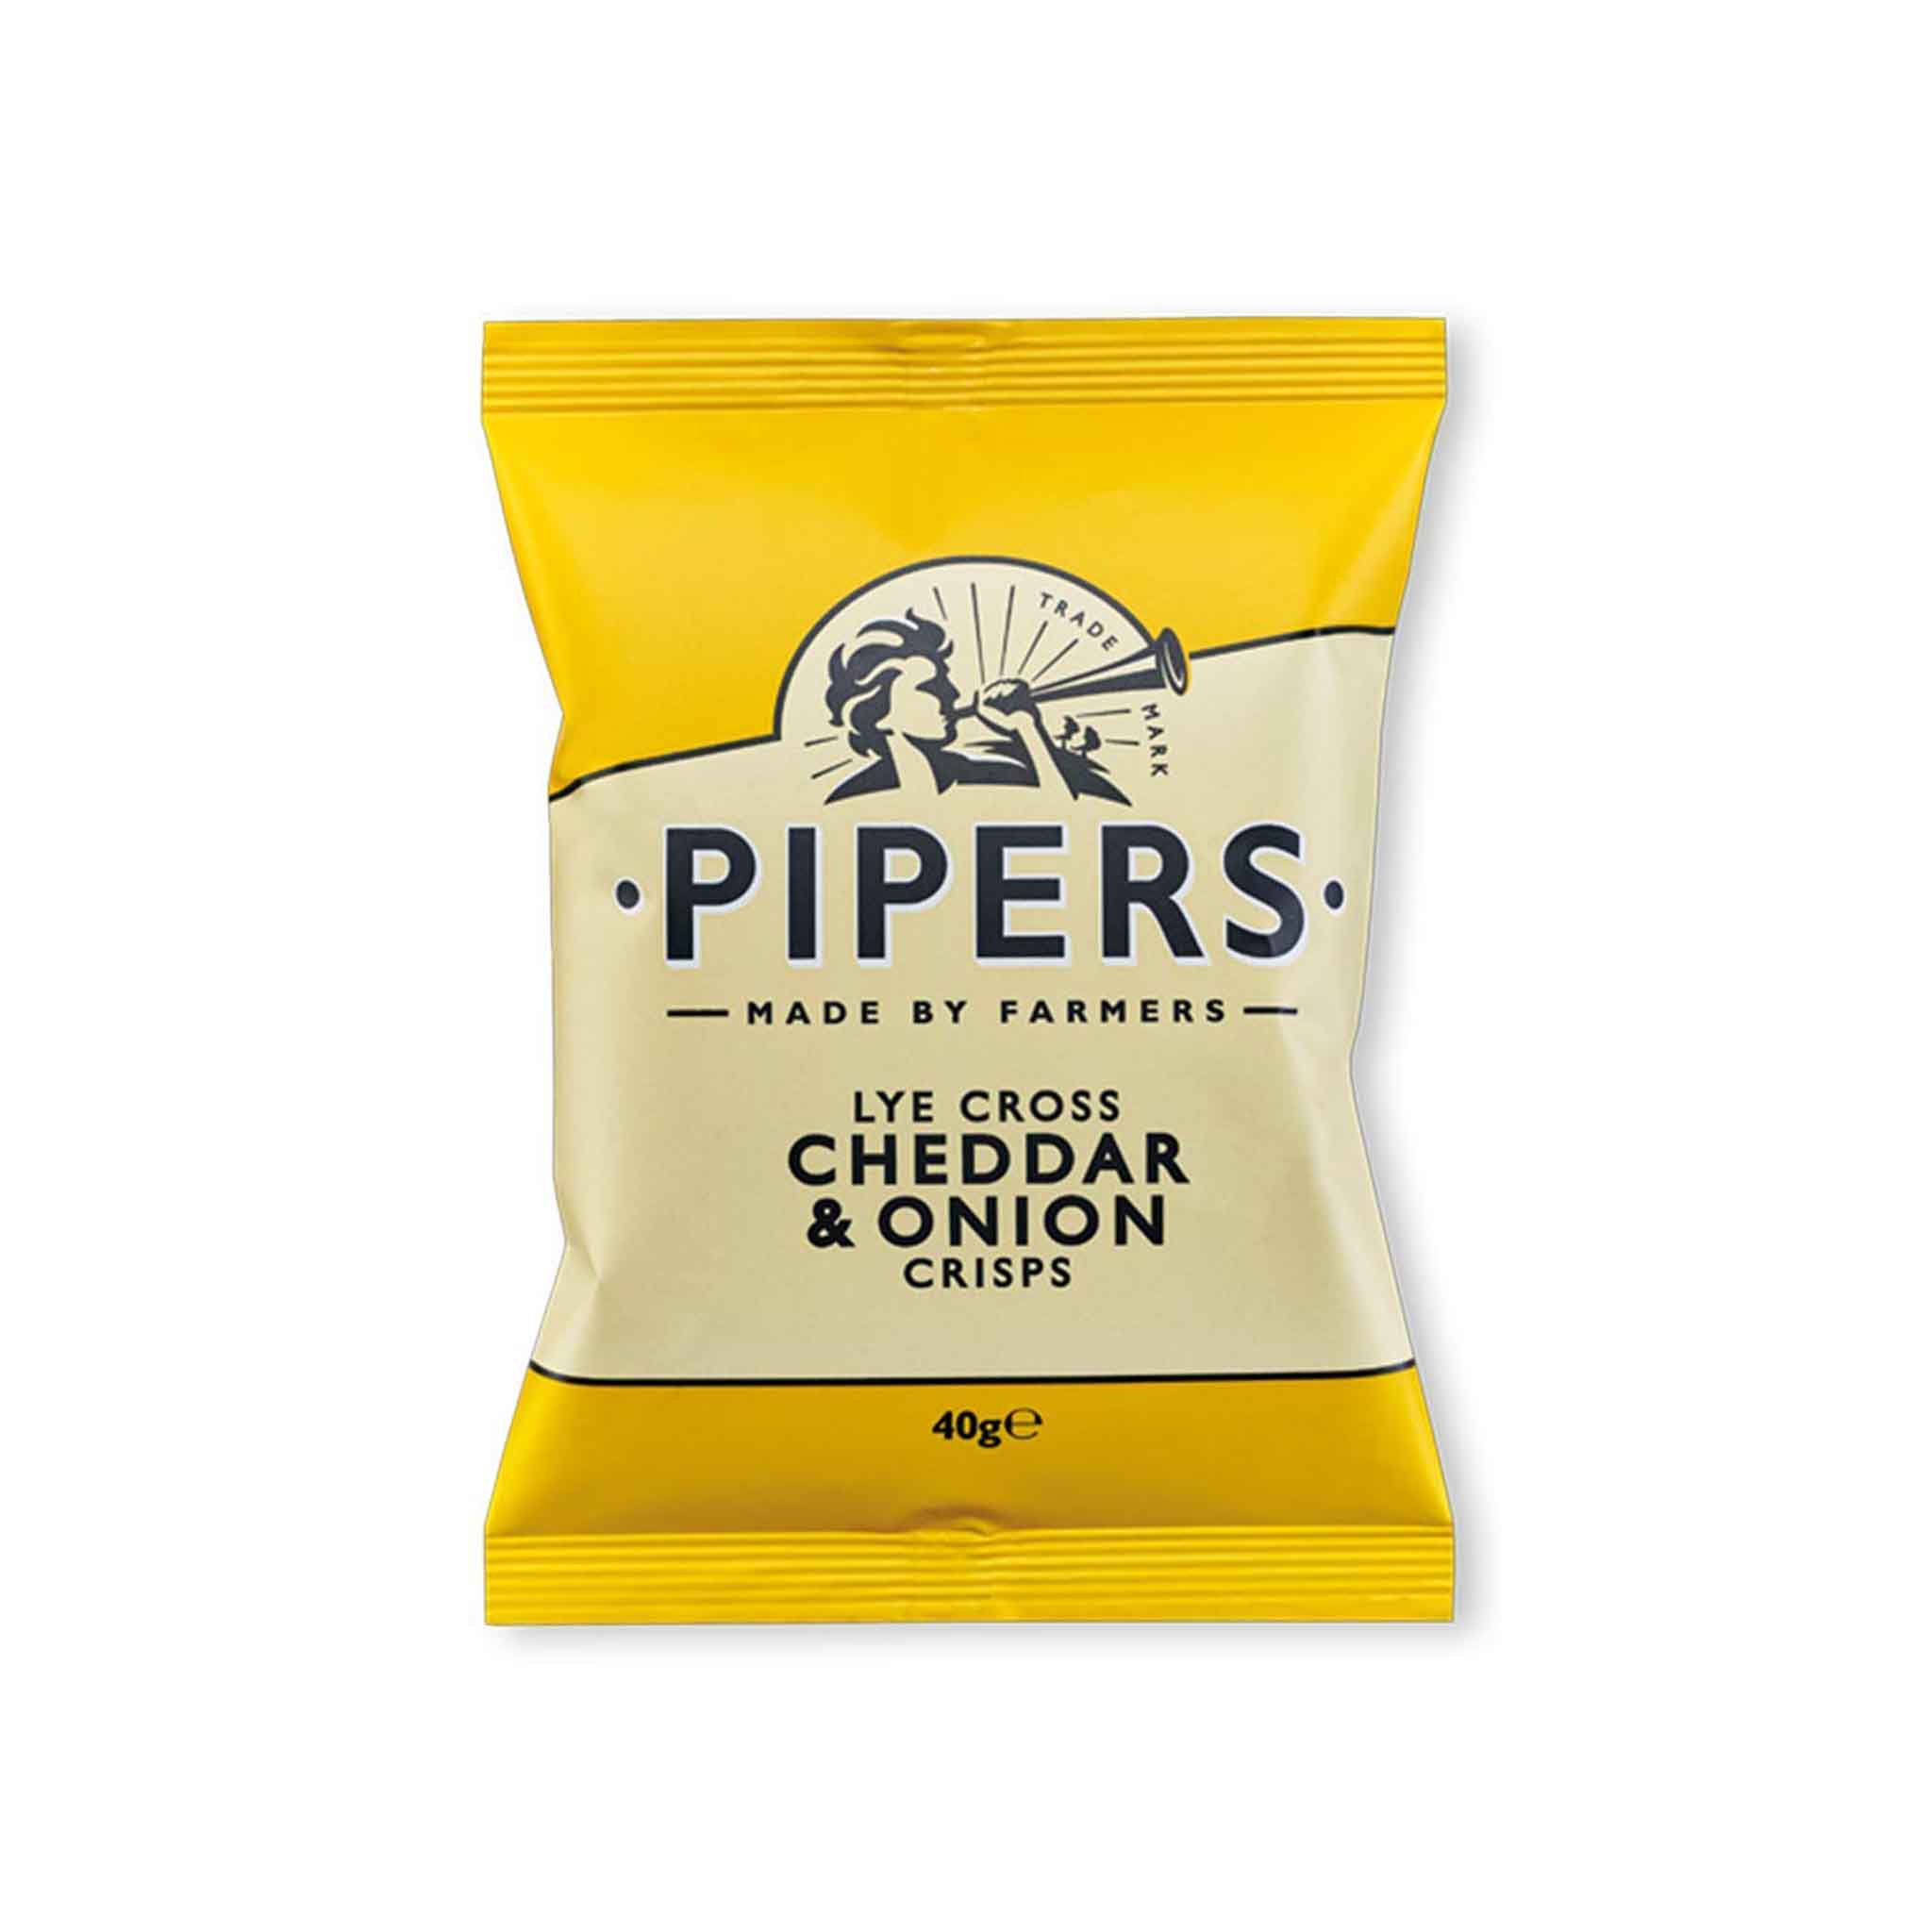 PIPERS CHEDDAR ONION CHIPS 40g